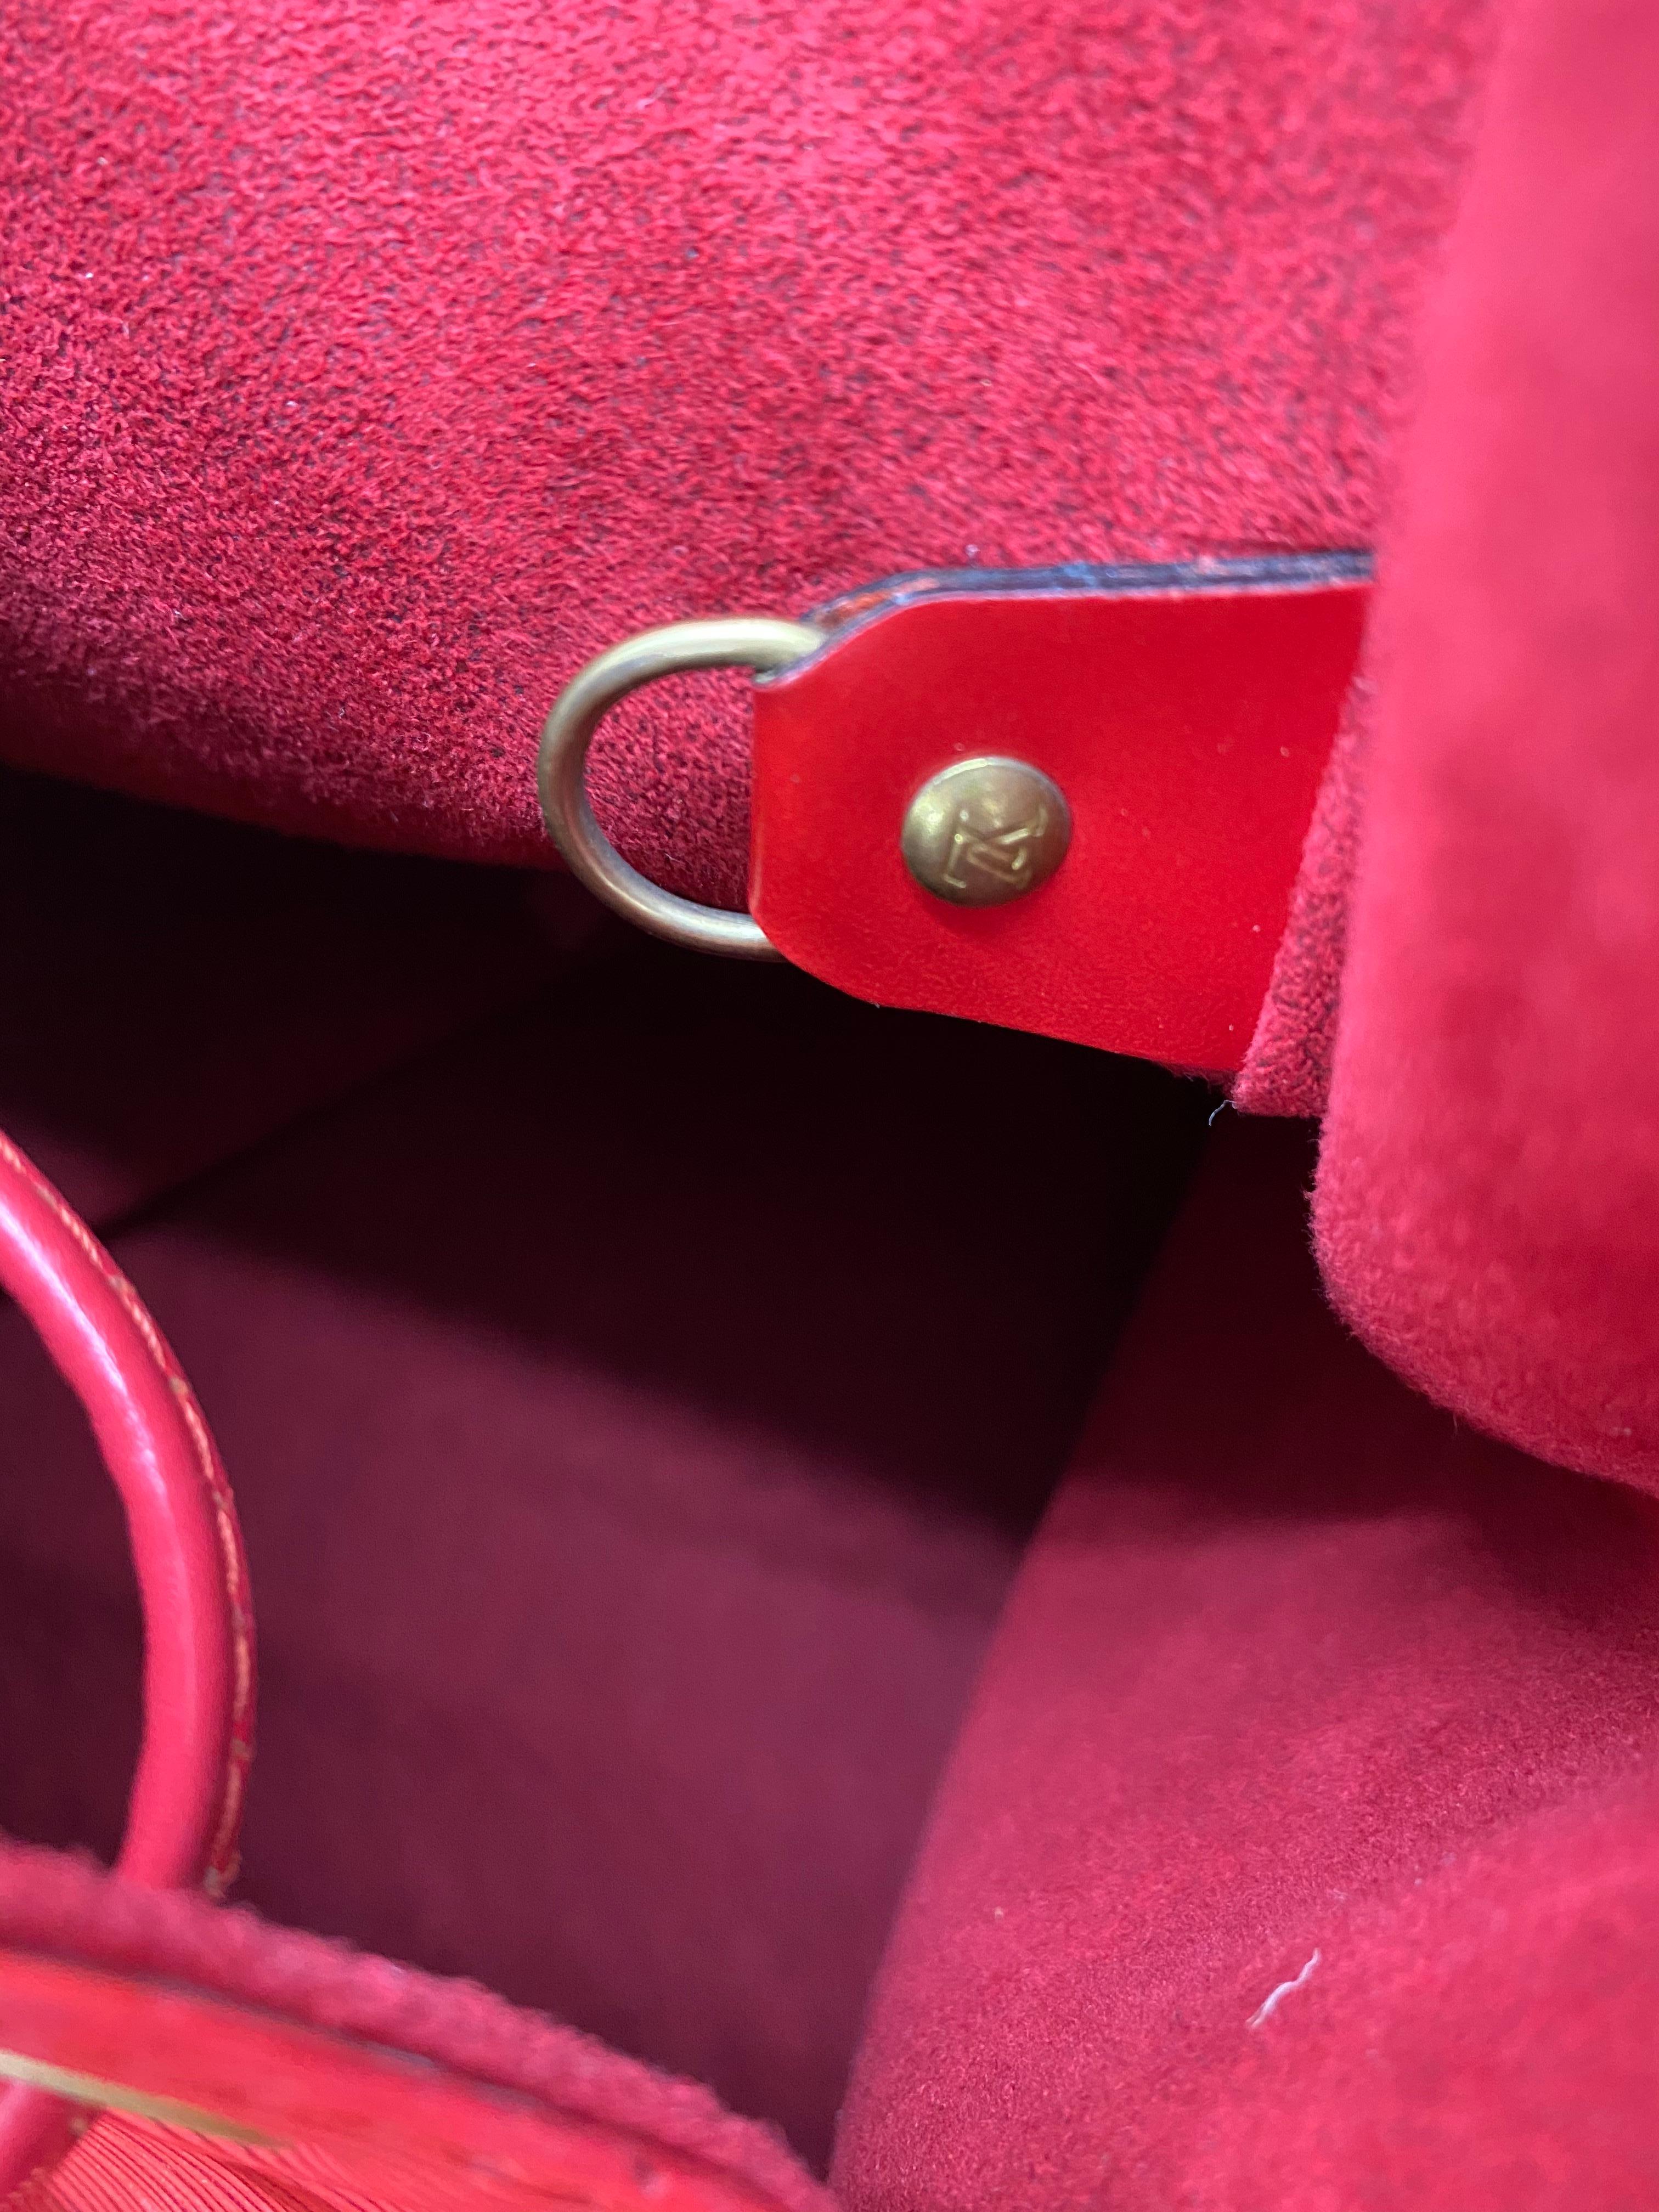 Louis Vuitton Noe PM Bucket Bag in Red EPI Leather, June 1995. 3